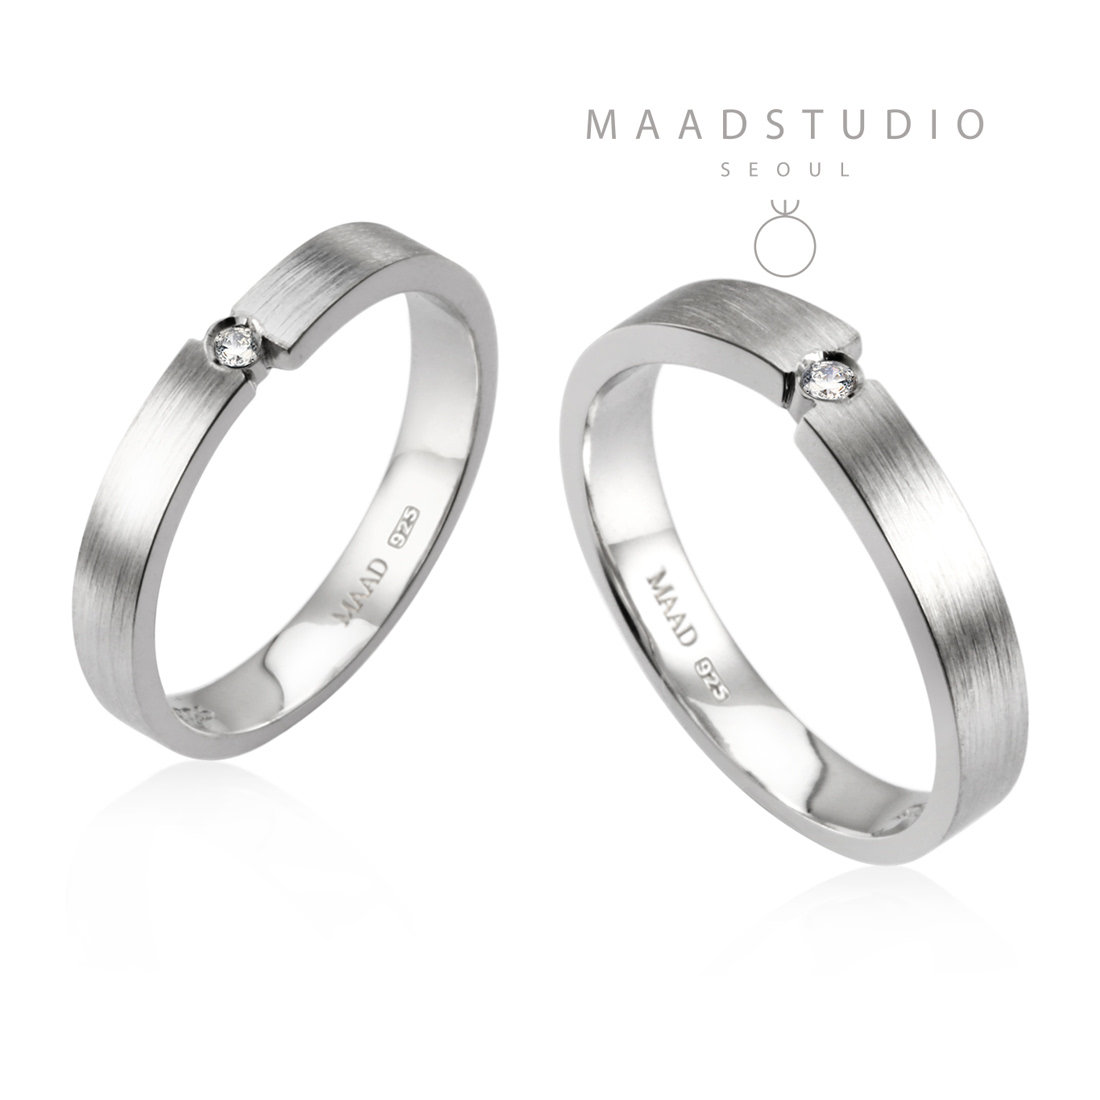 Encounter MG couple ring Set (M&S) hairline, Diamond Sterling silver